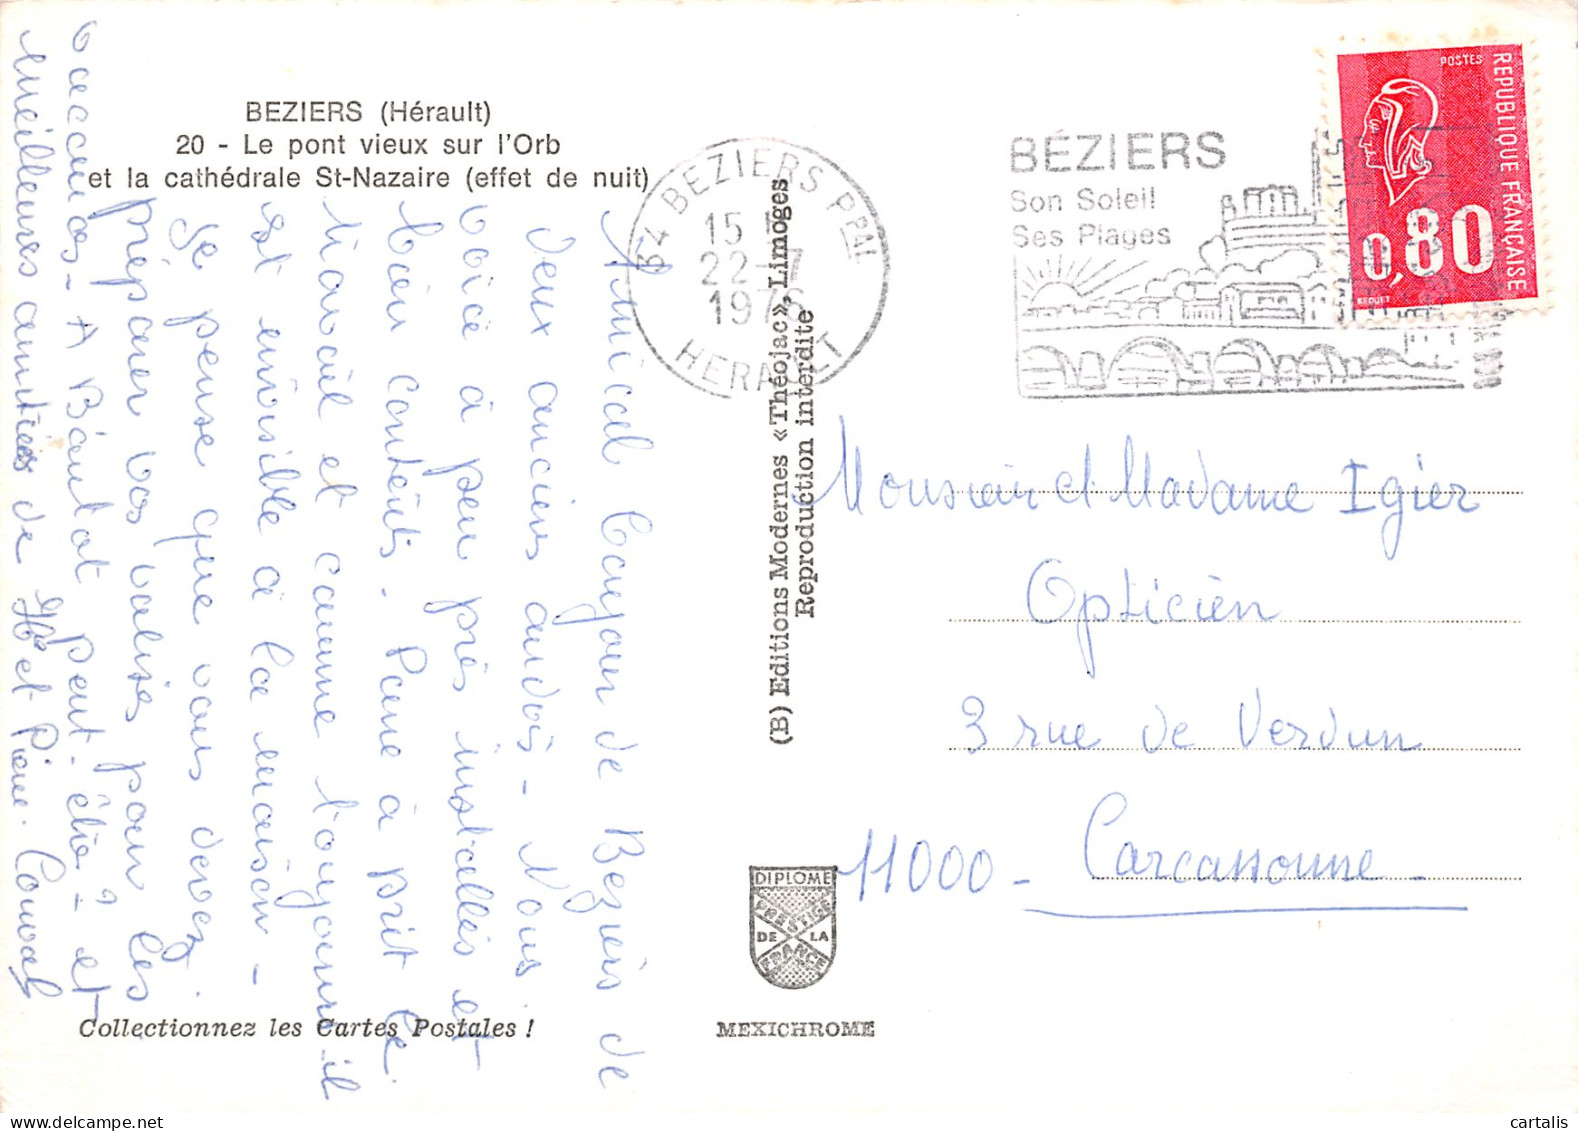 34-BEZIERS-N°3806-C/0275 - Beziers